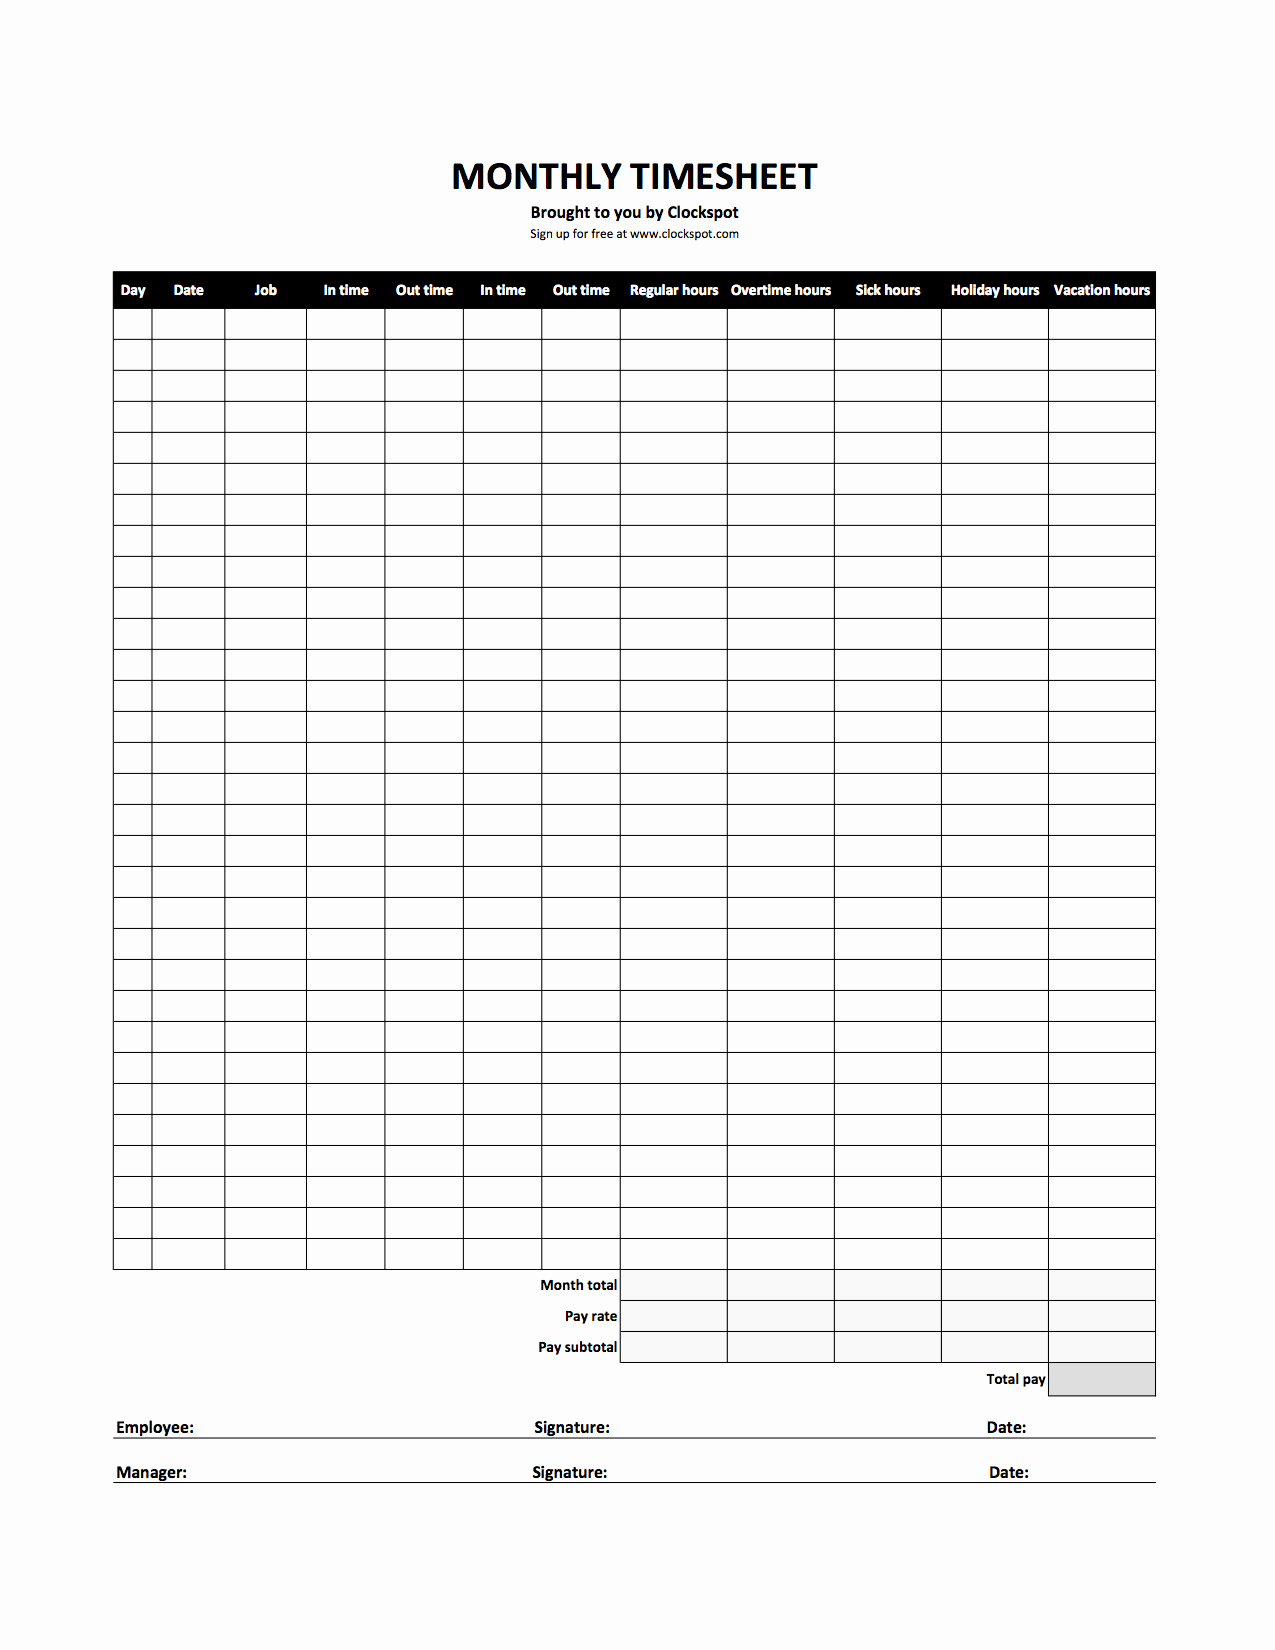 Creating A Timesheet In Excel Awesome Free Time Tracking Spreadsheets